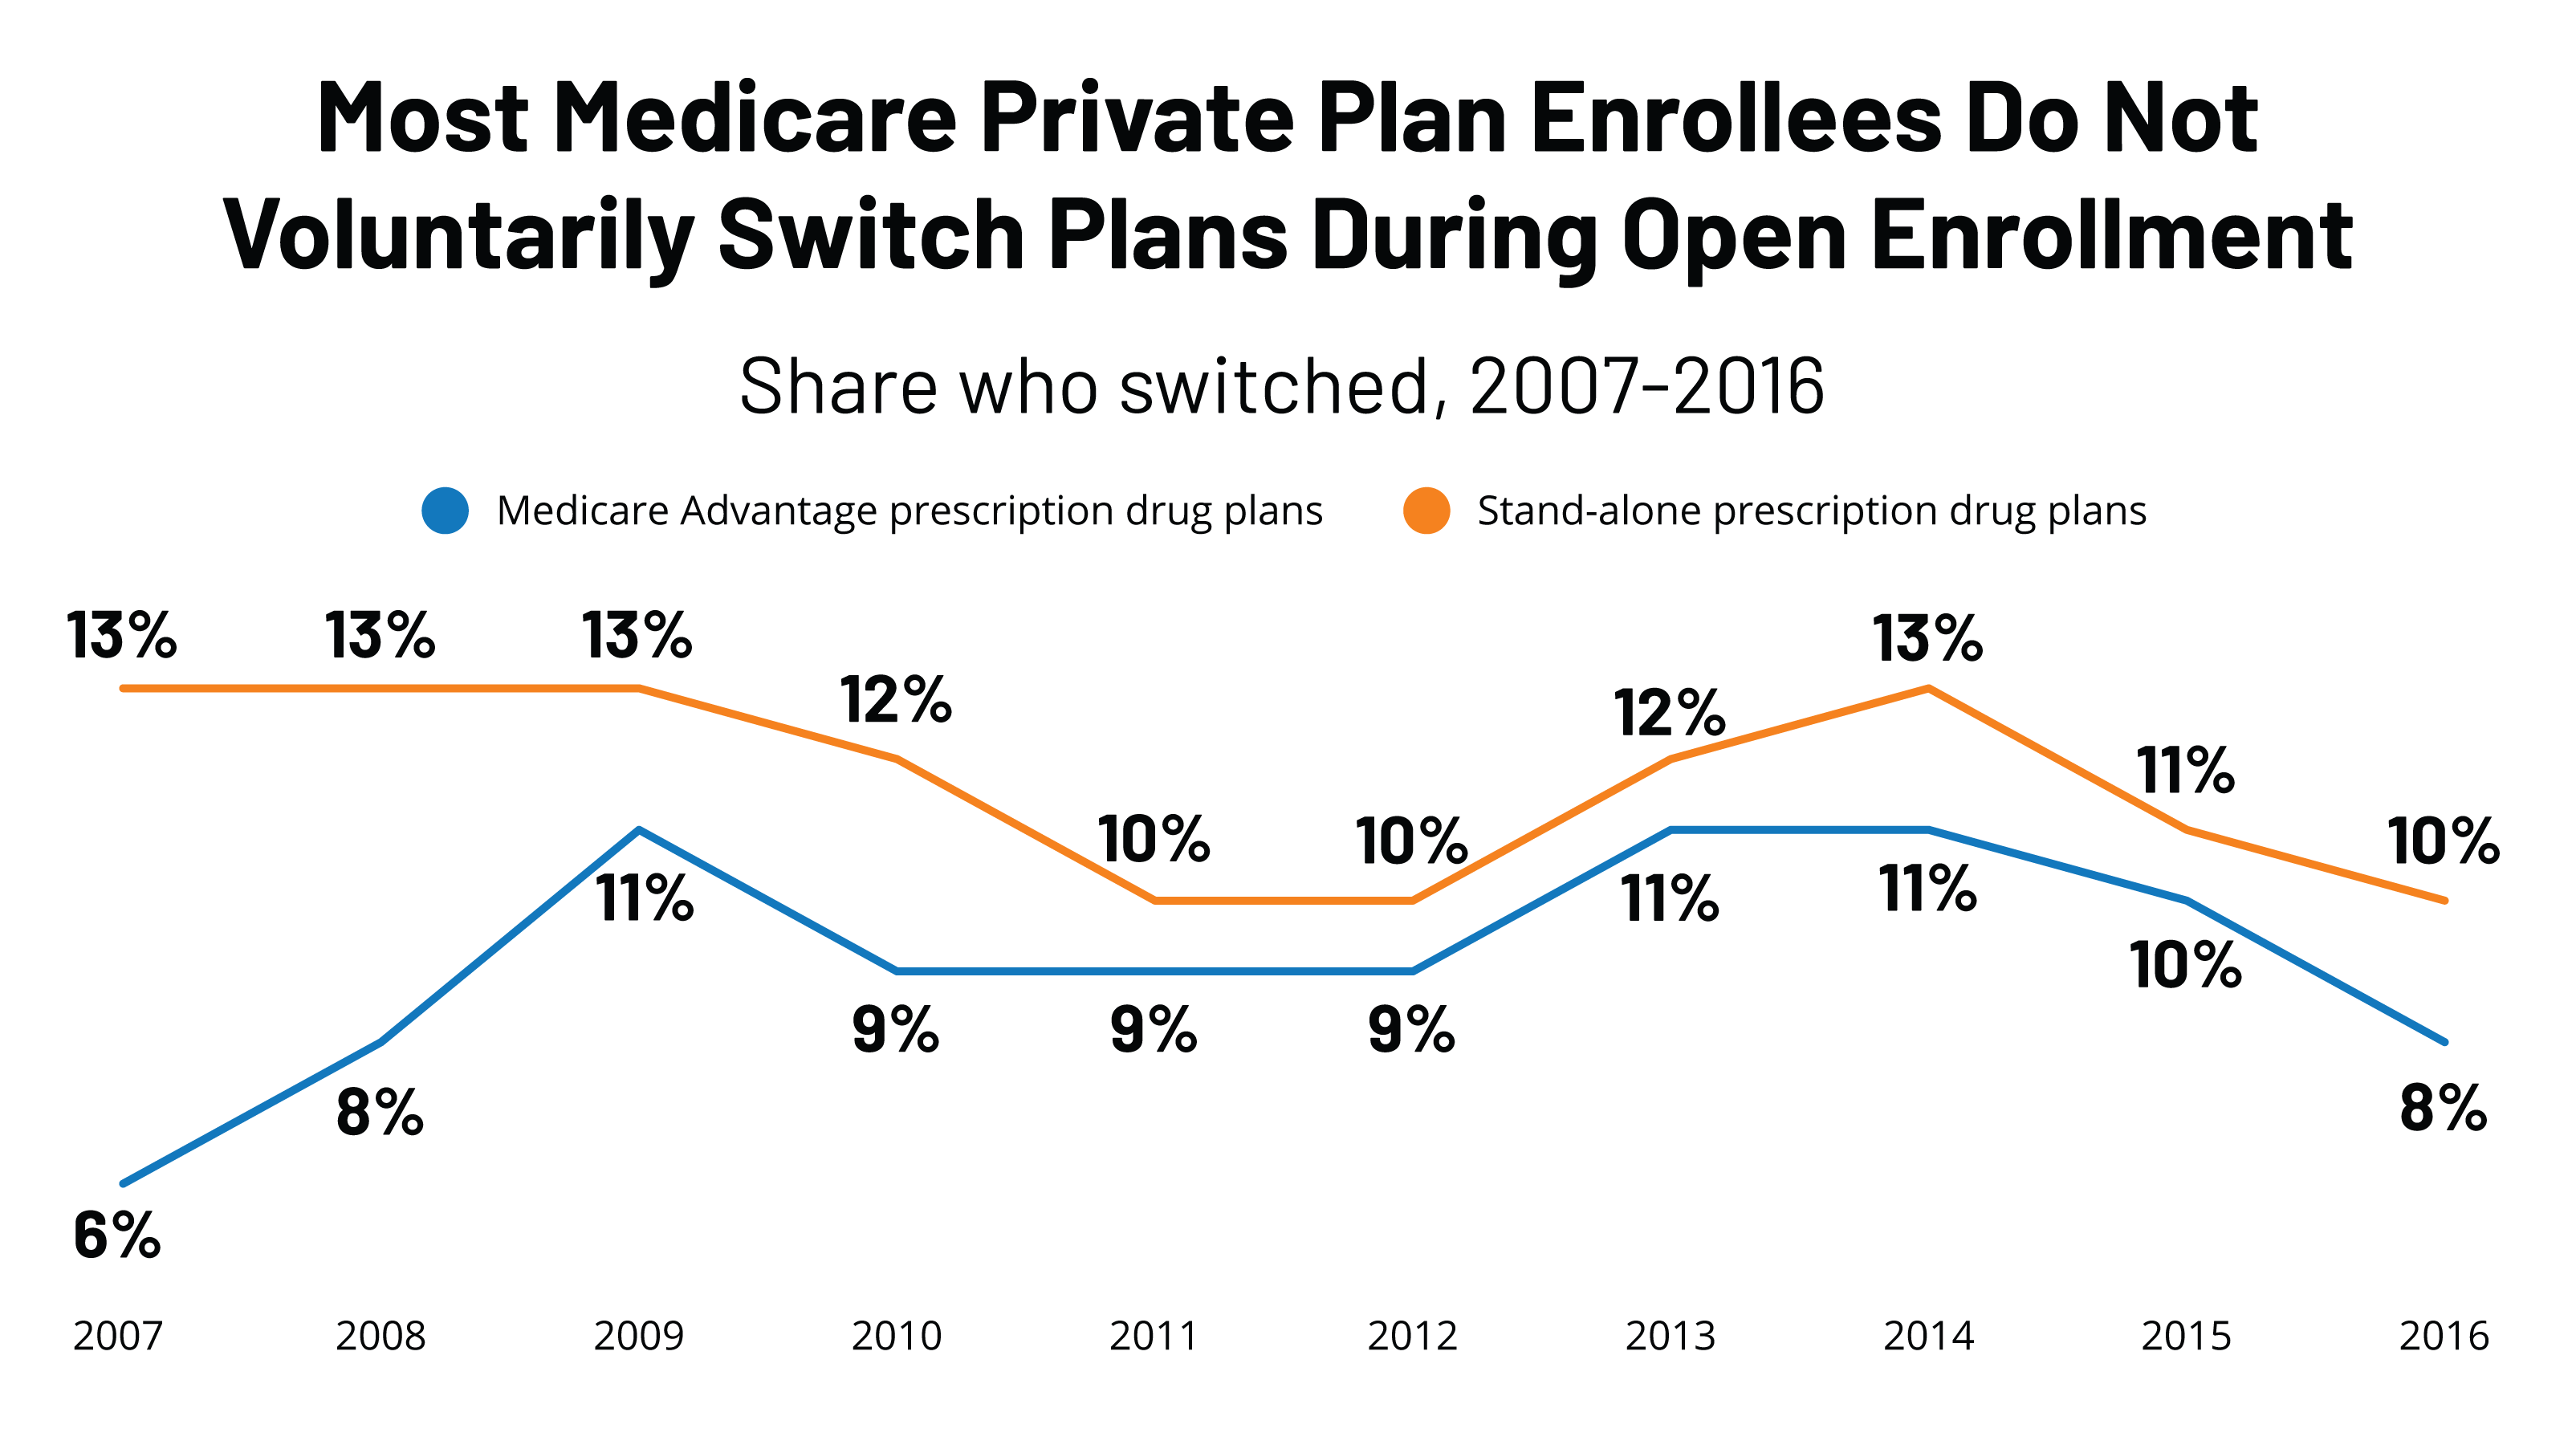 A Small Share of People with Medicare Advantage or Standalone Medicare